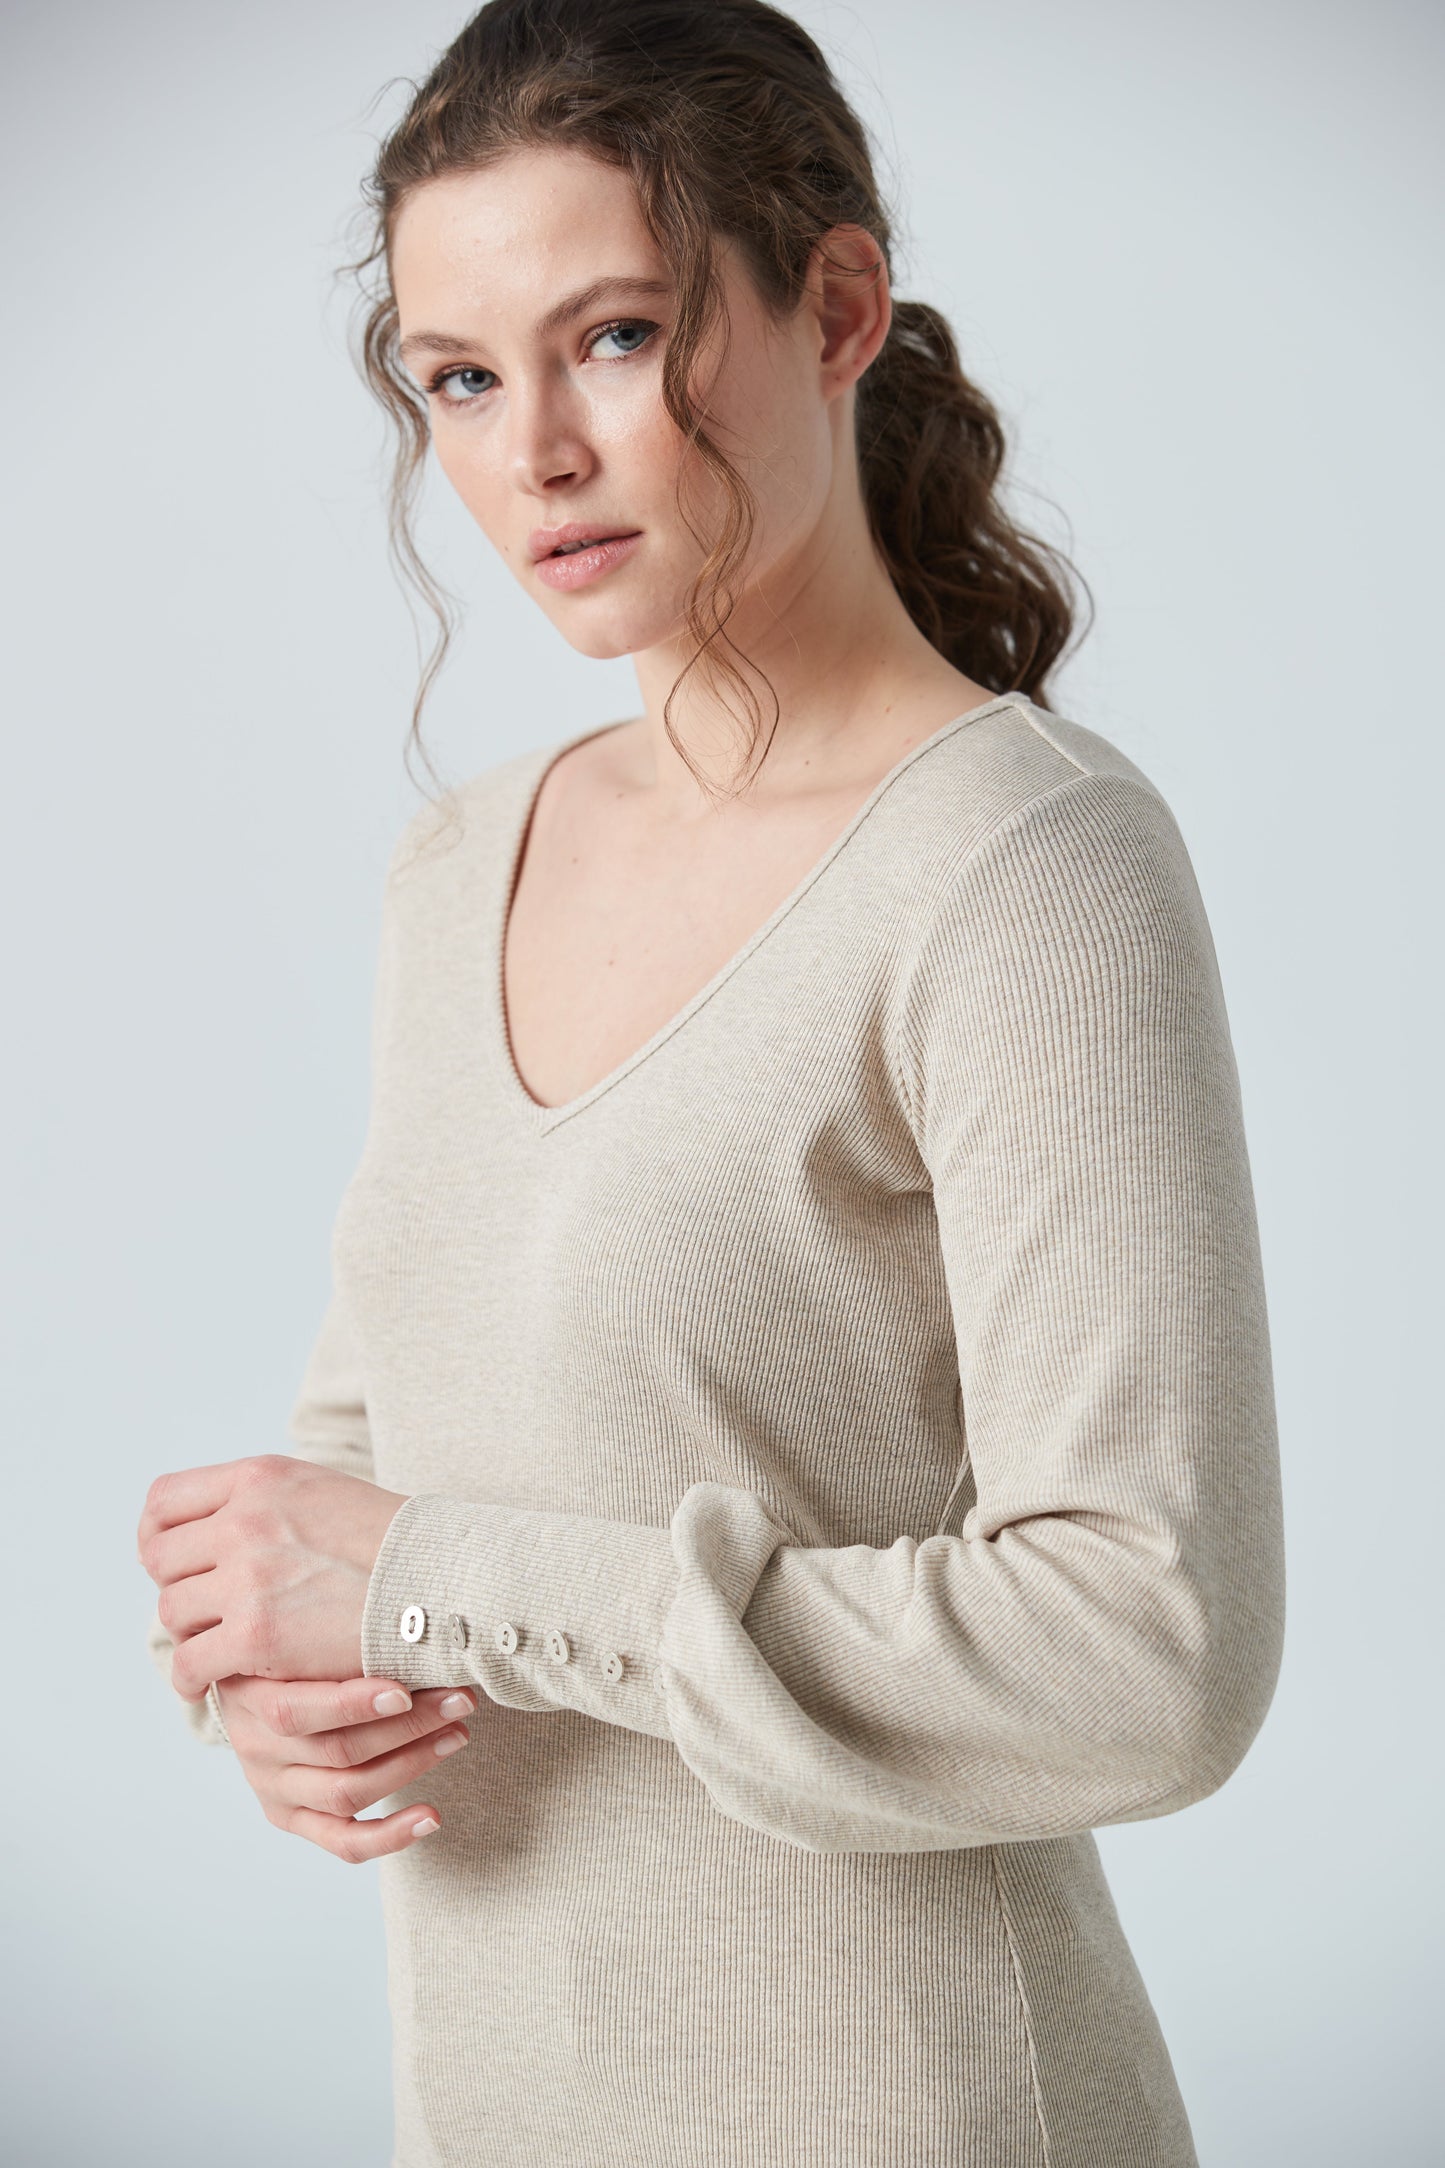 V-neck top with puffy sleeves